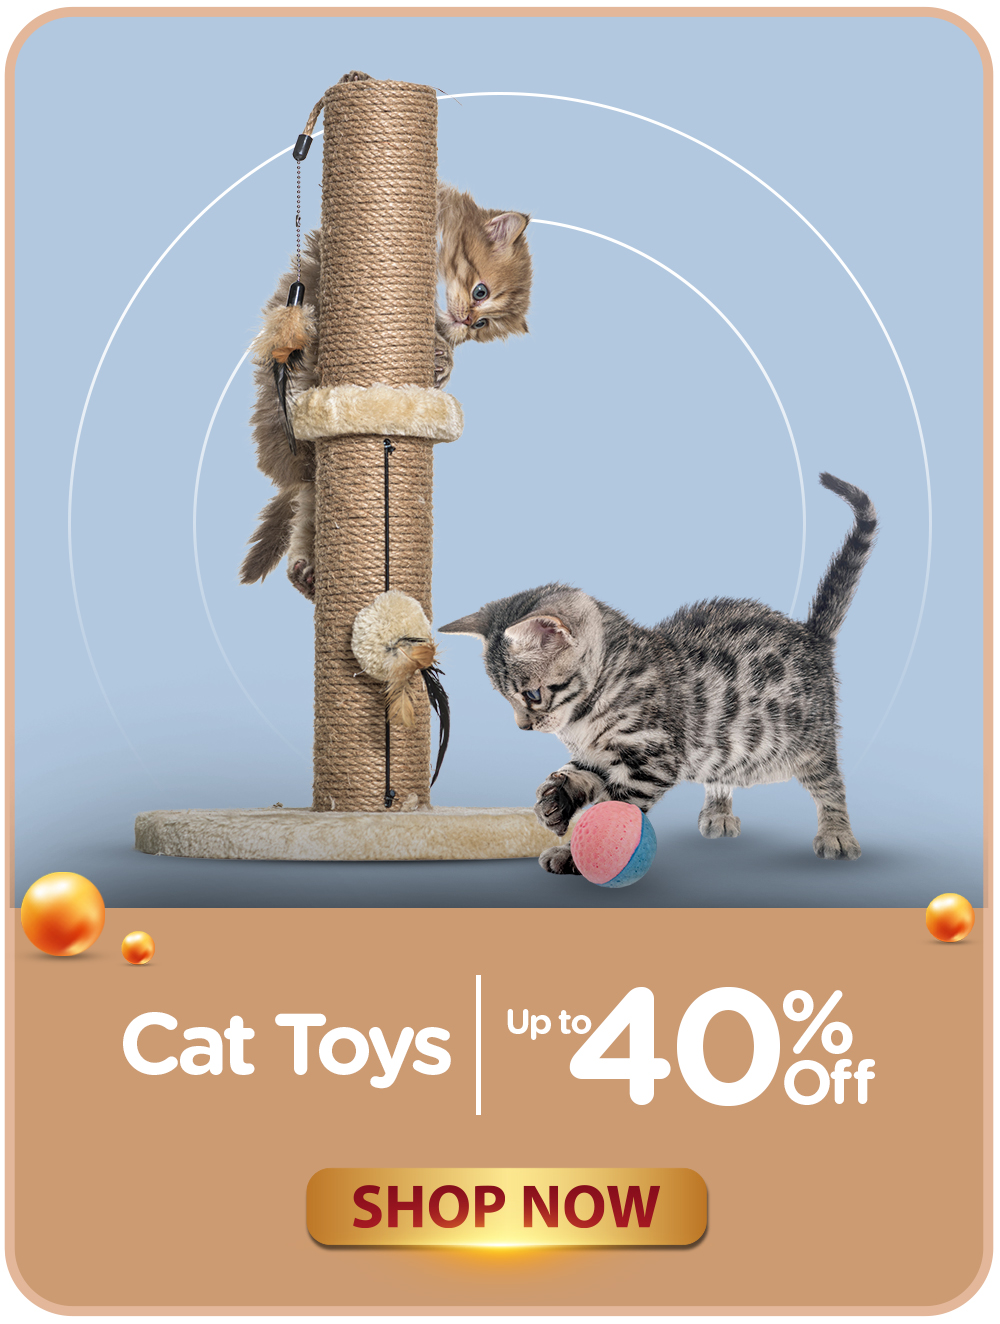 06 - CATEGORY BANNERS - CAT TOYS VER2